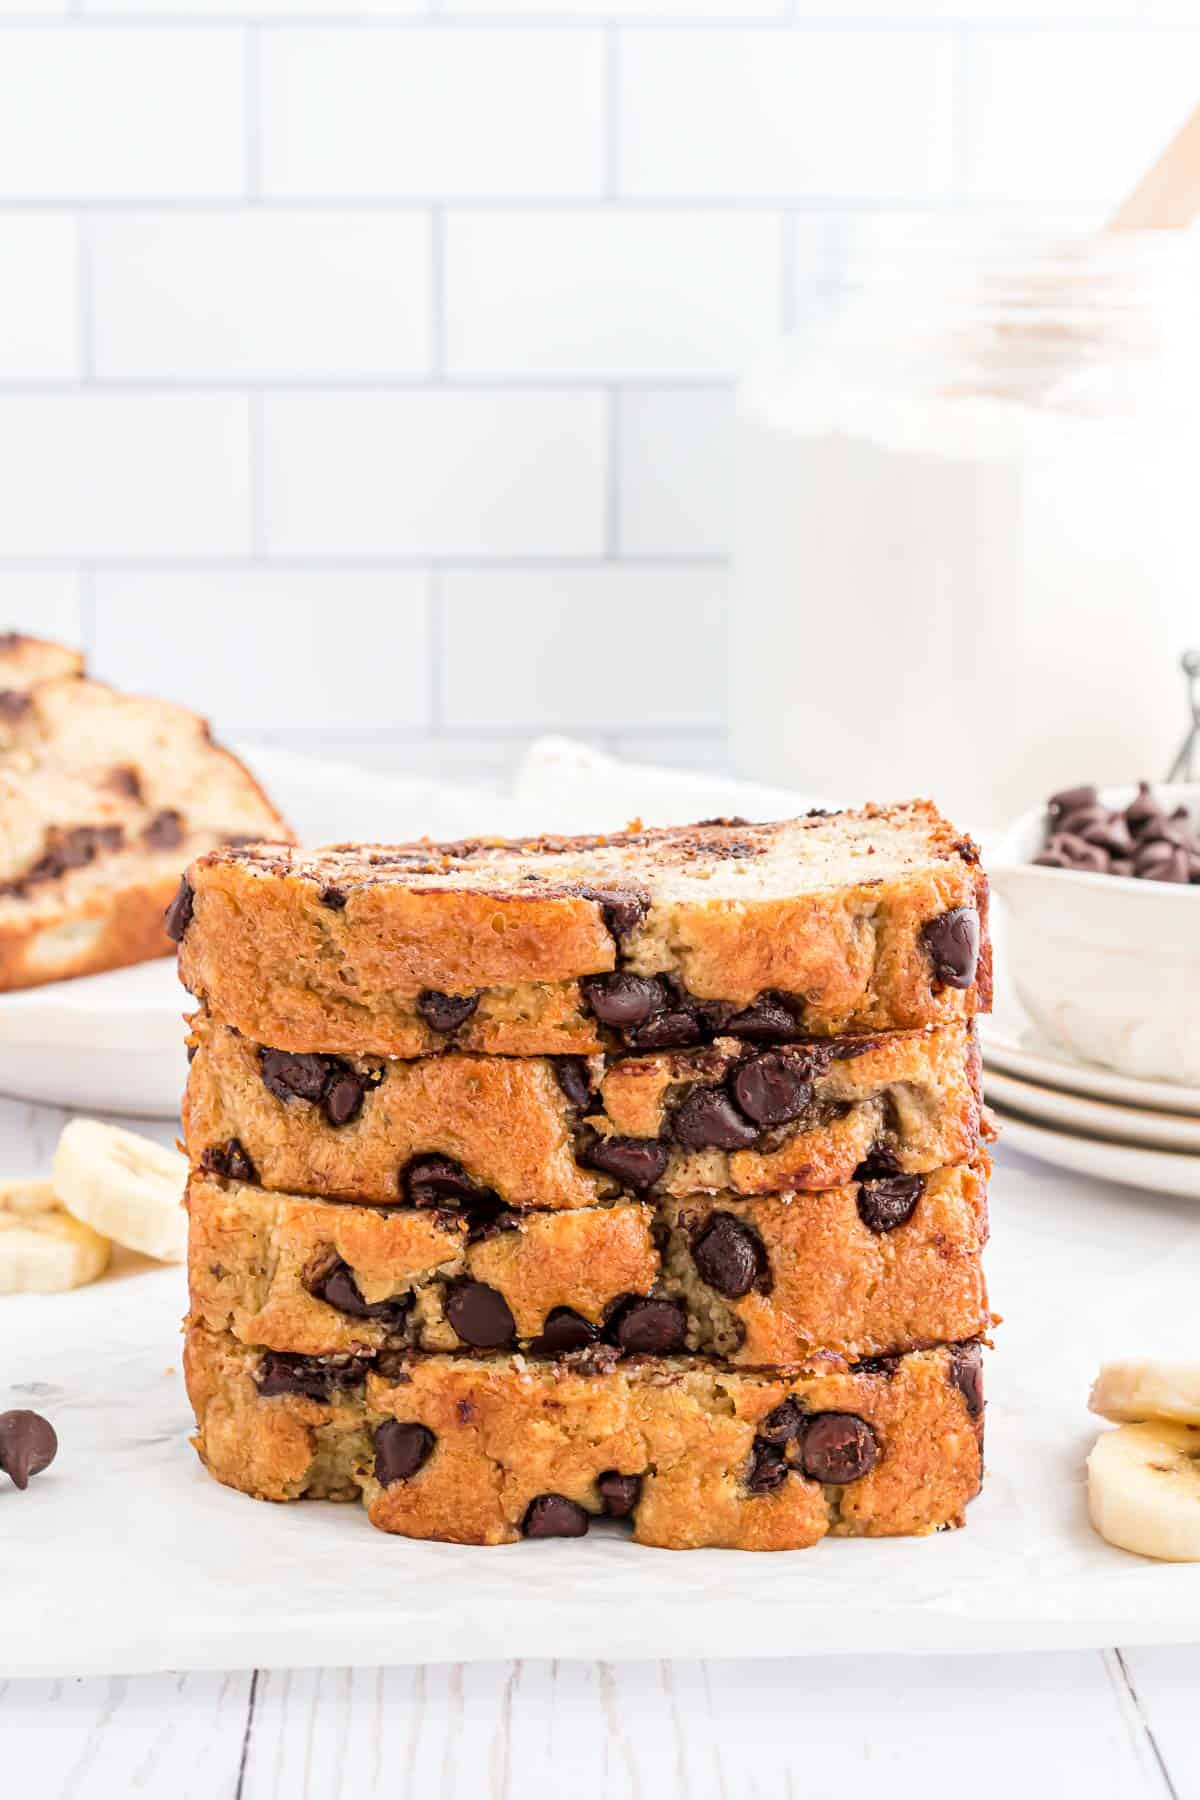 Chocolate chip banana bread slices stacked.